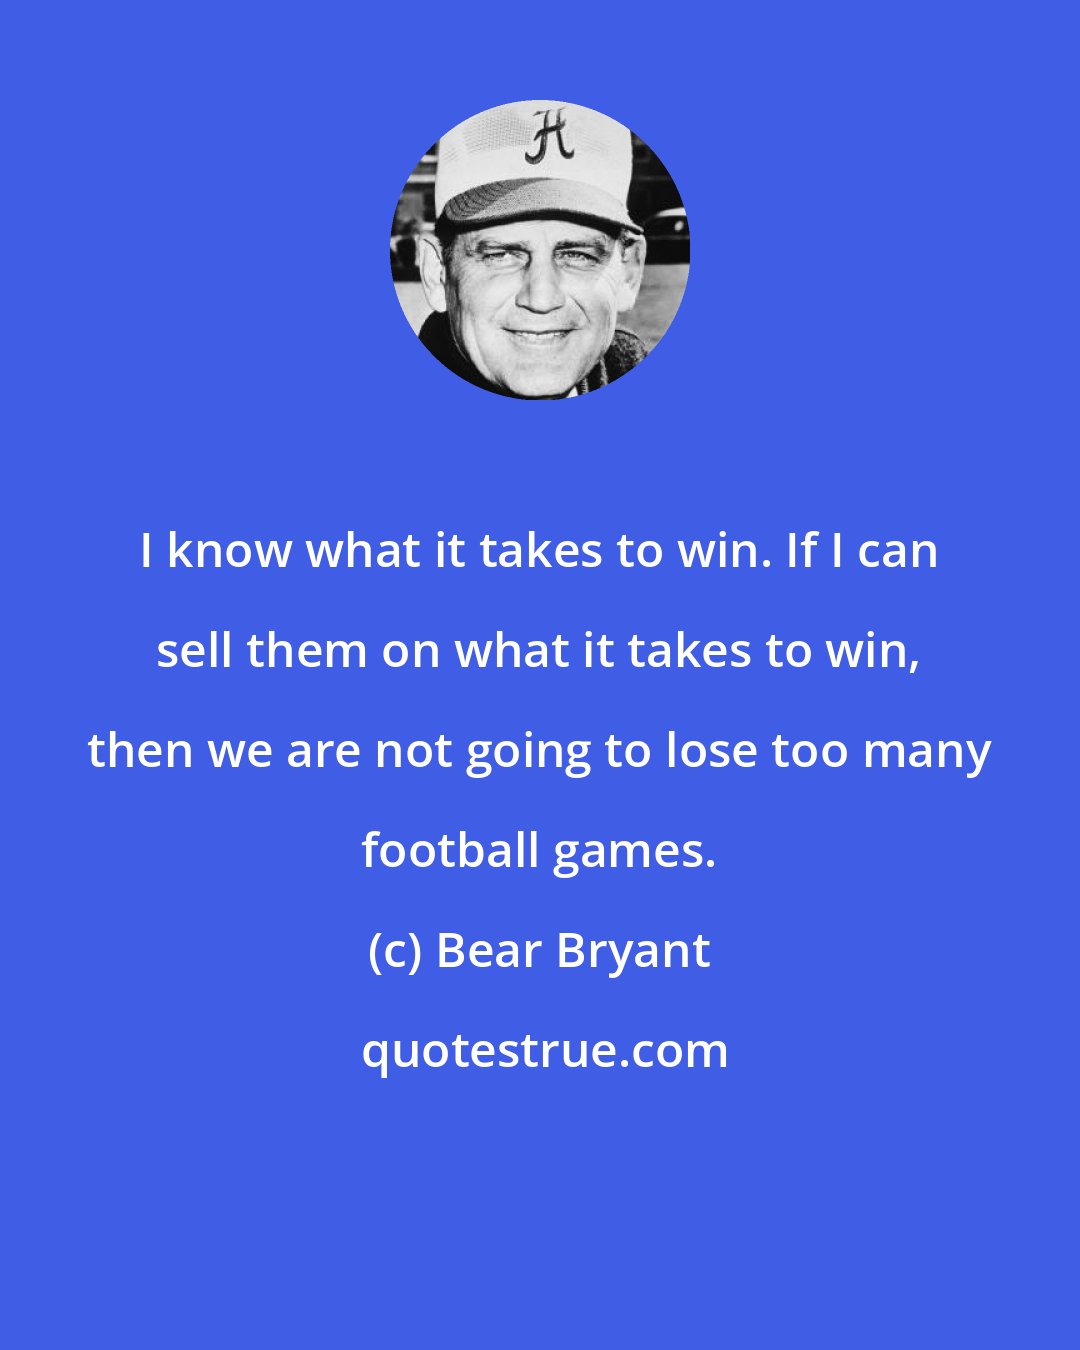 Bear Bryant: I know what it takes to win. If I can sell them on what it takes to win, then we are not going to lose too many football games.